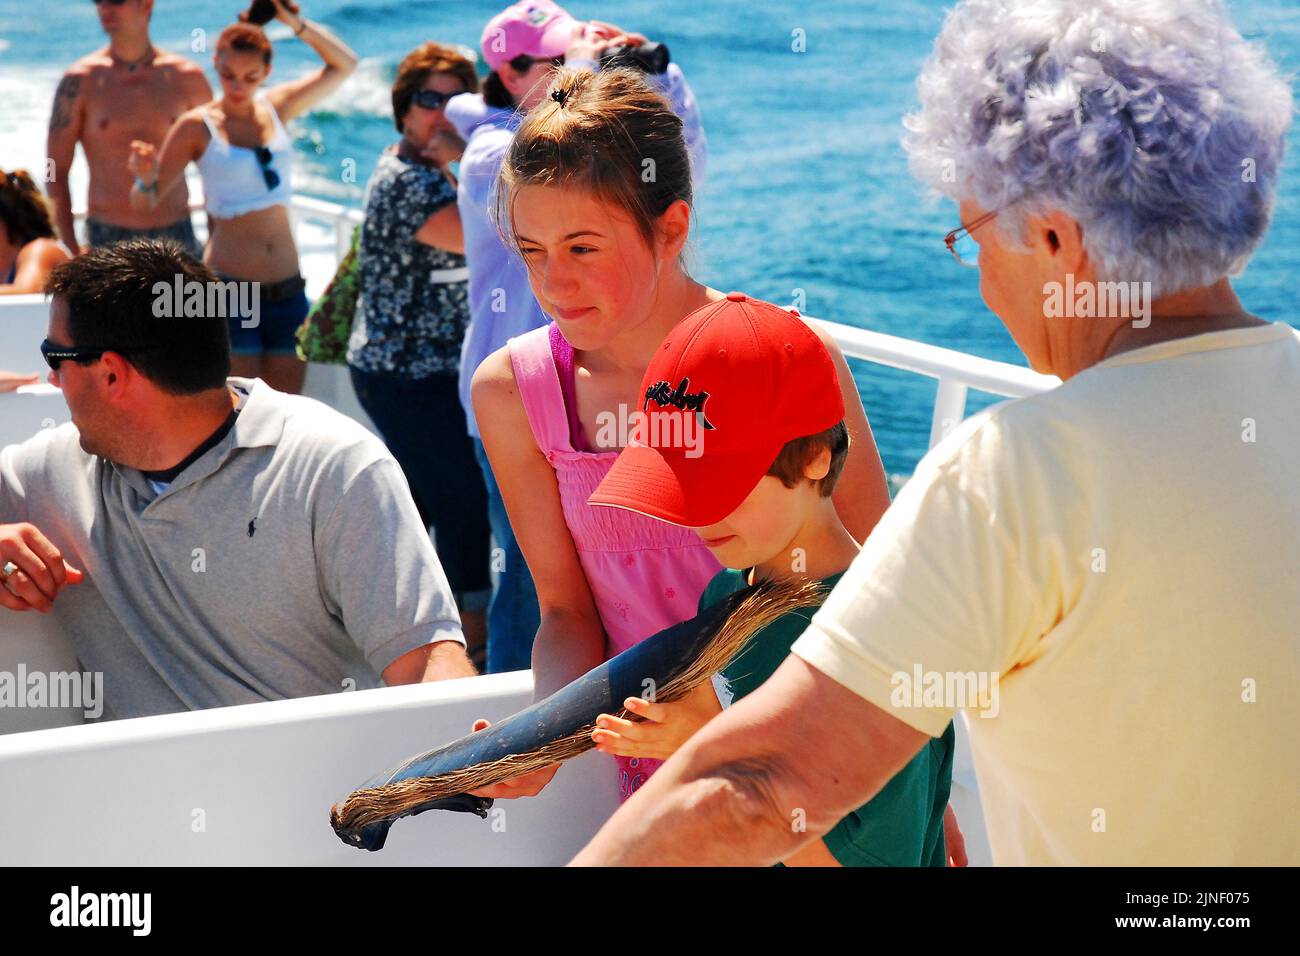 A Family on a Whale Watch Cruise off the coast of Cape Cod examine baleen from a Humpback Whale Stock Photo